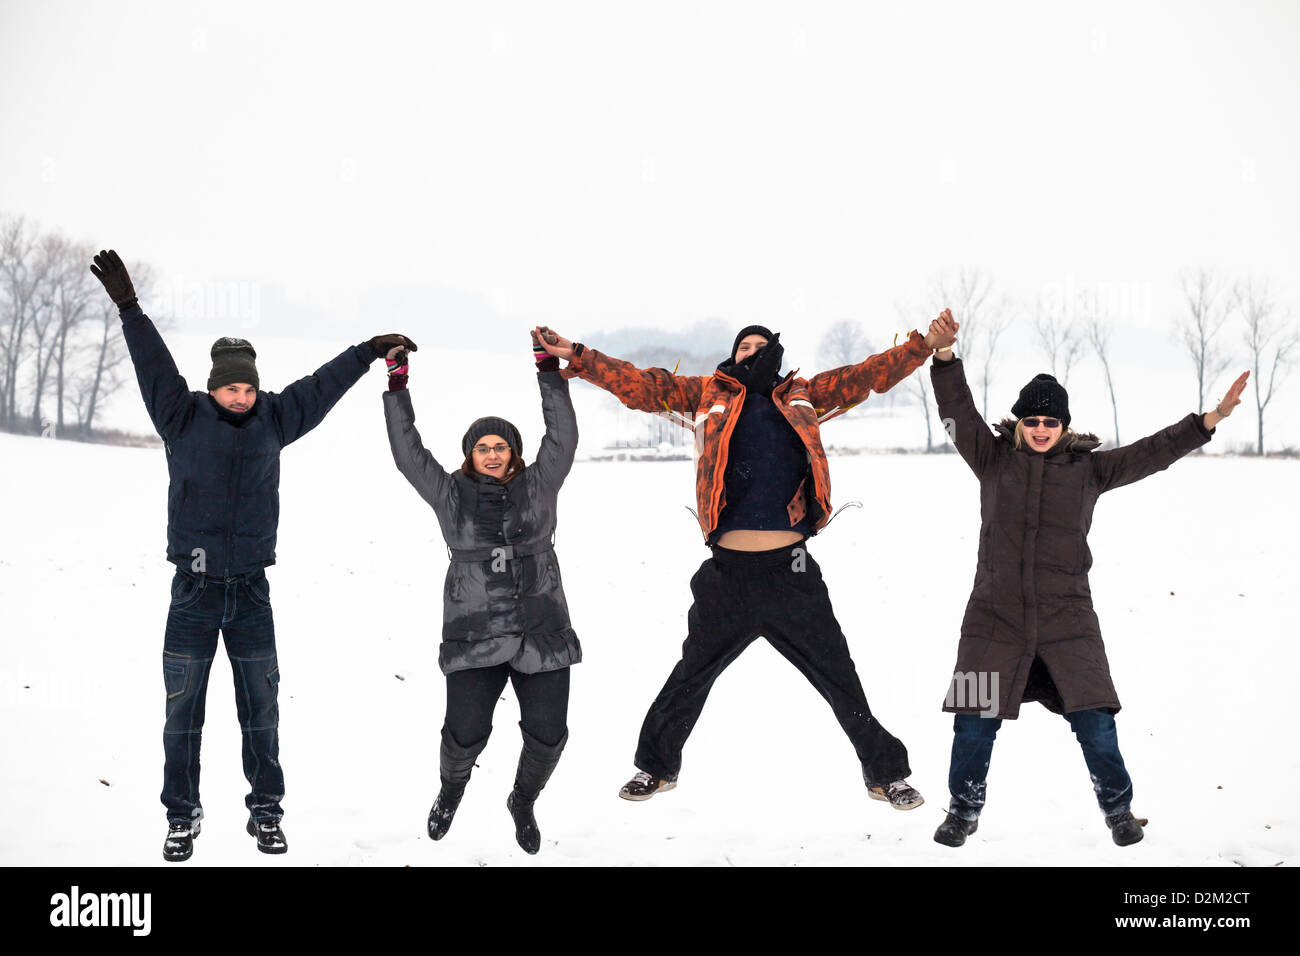 Group of young happy people jumping in snow and enjoying winter. Stock Photo